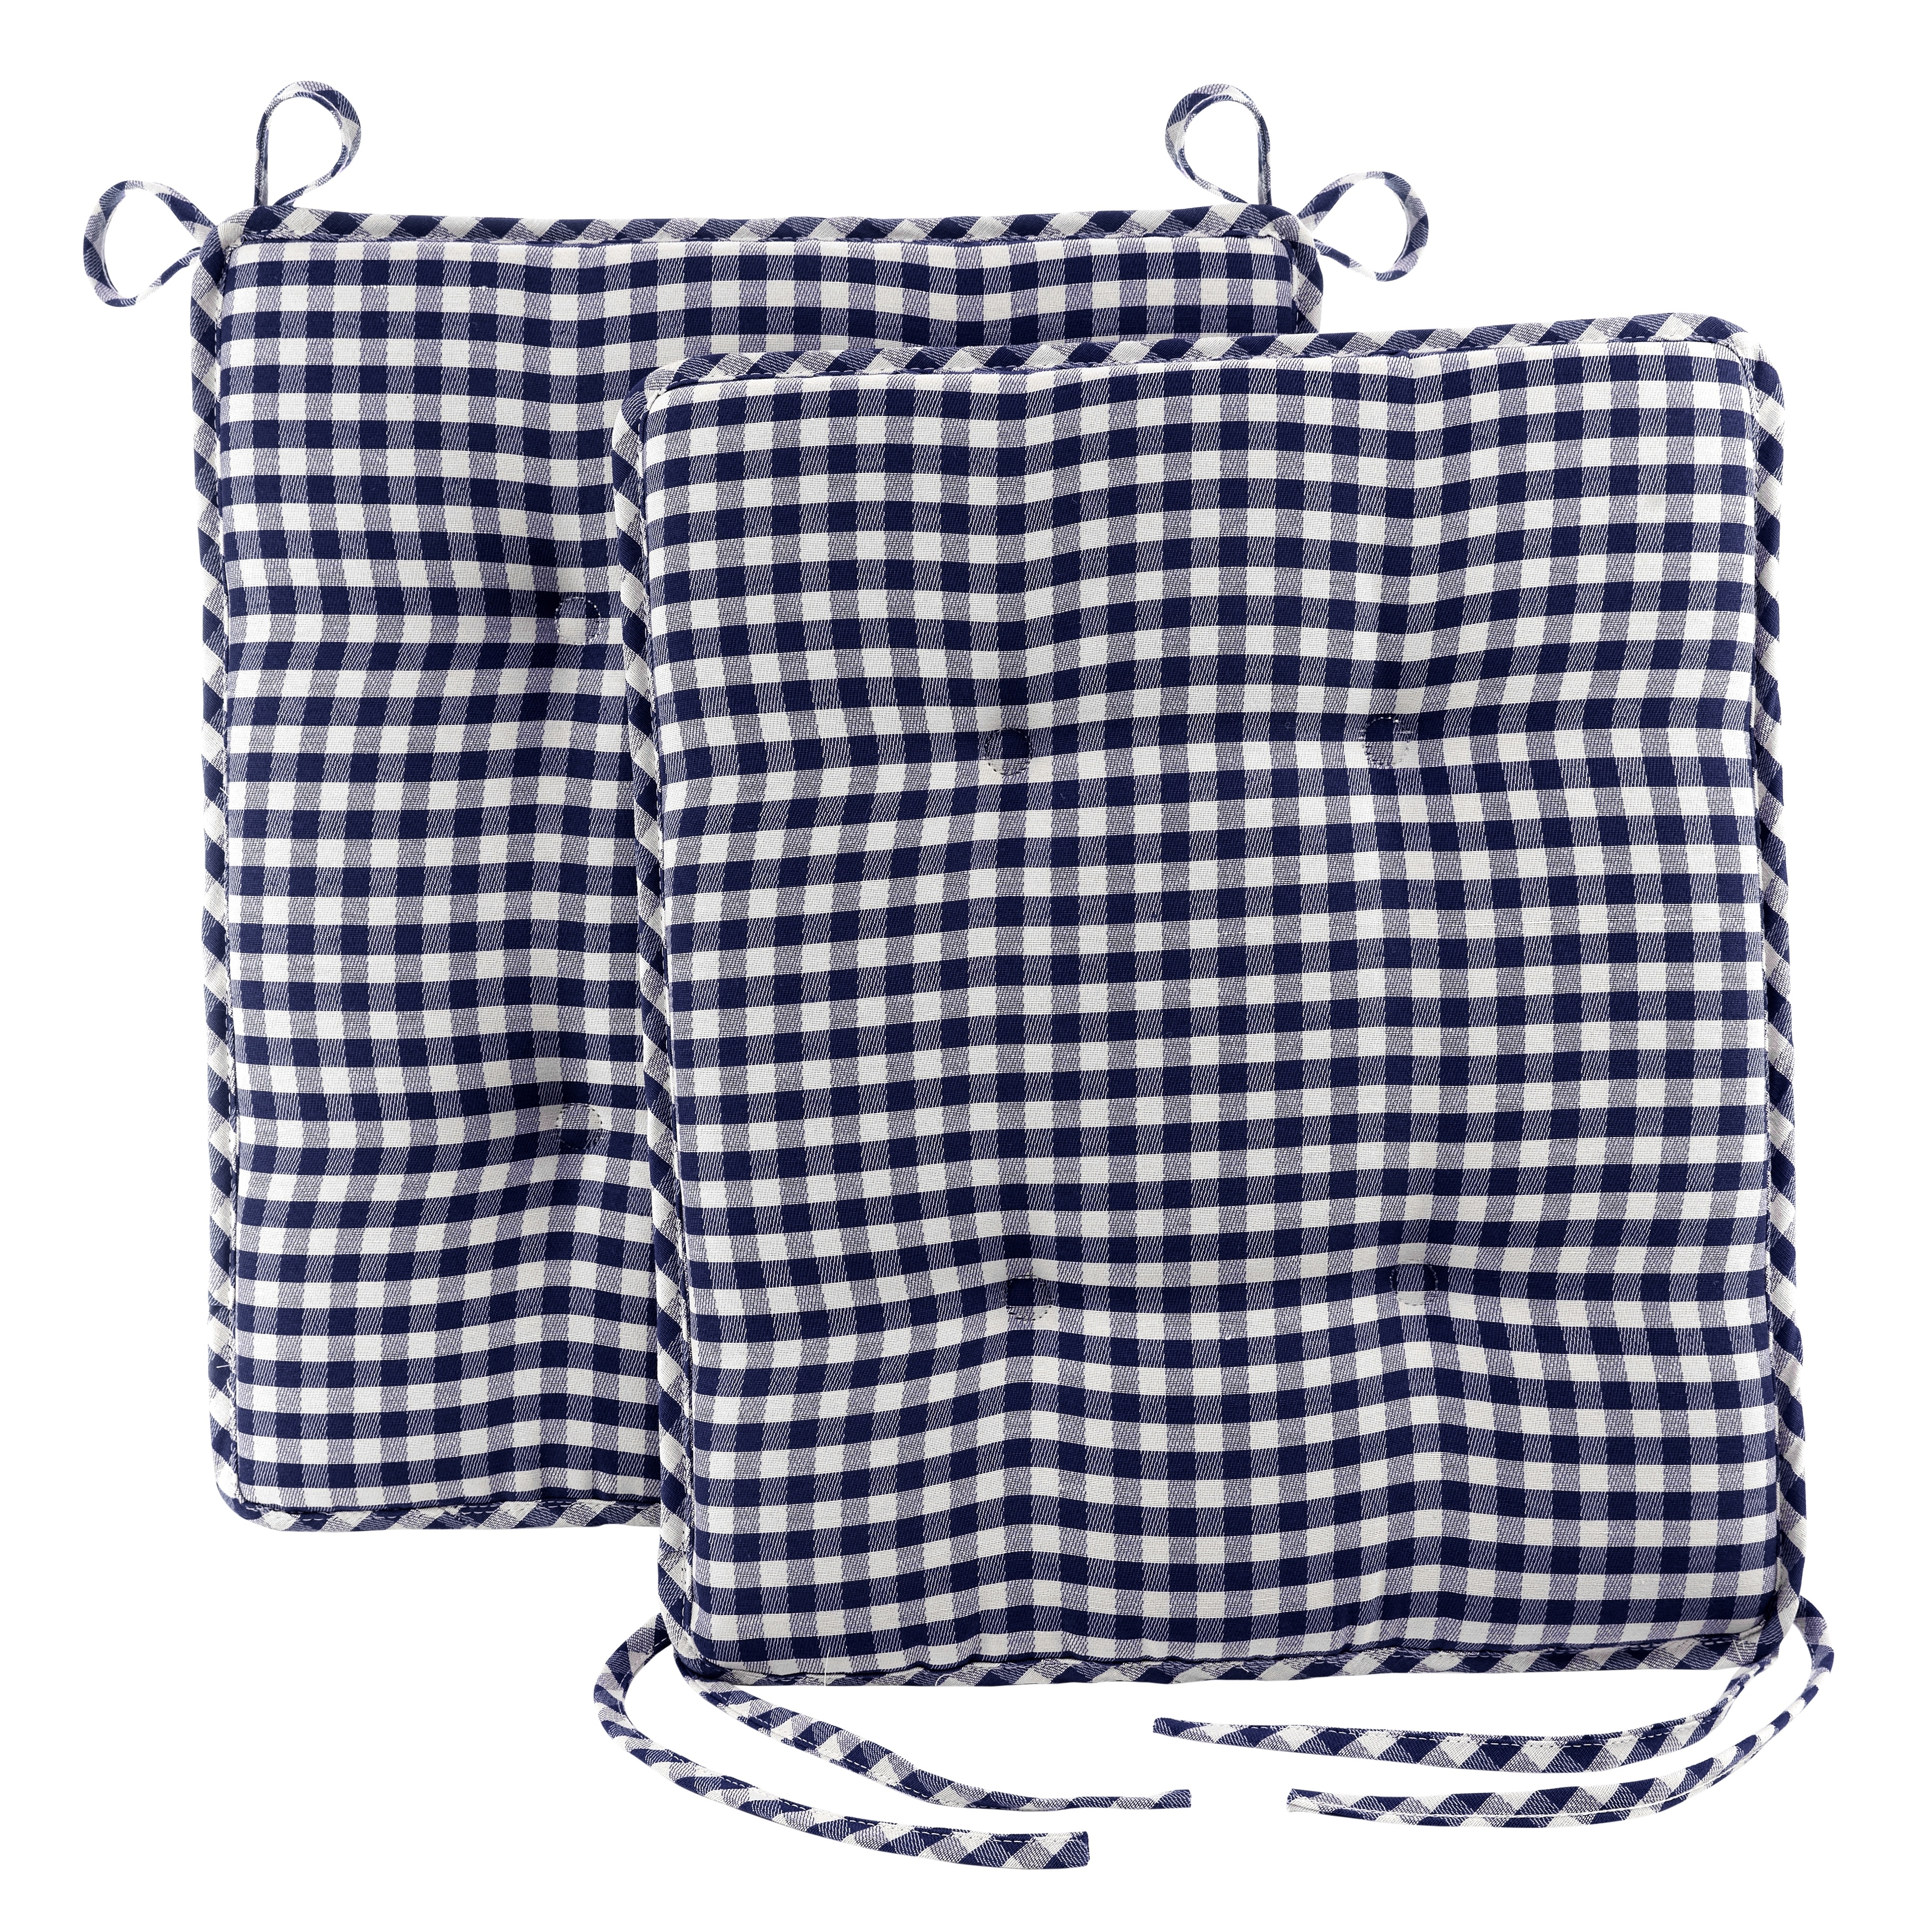 https://ak1.ostkcdn.com/images/products/is/images/direct/69aa0e795a3d2c8811efa23cd284ccba429cd97f/Non-Slip-Gripper-Gingham-Rocking-Chair-Cushion-Set.jpg